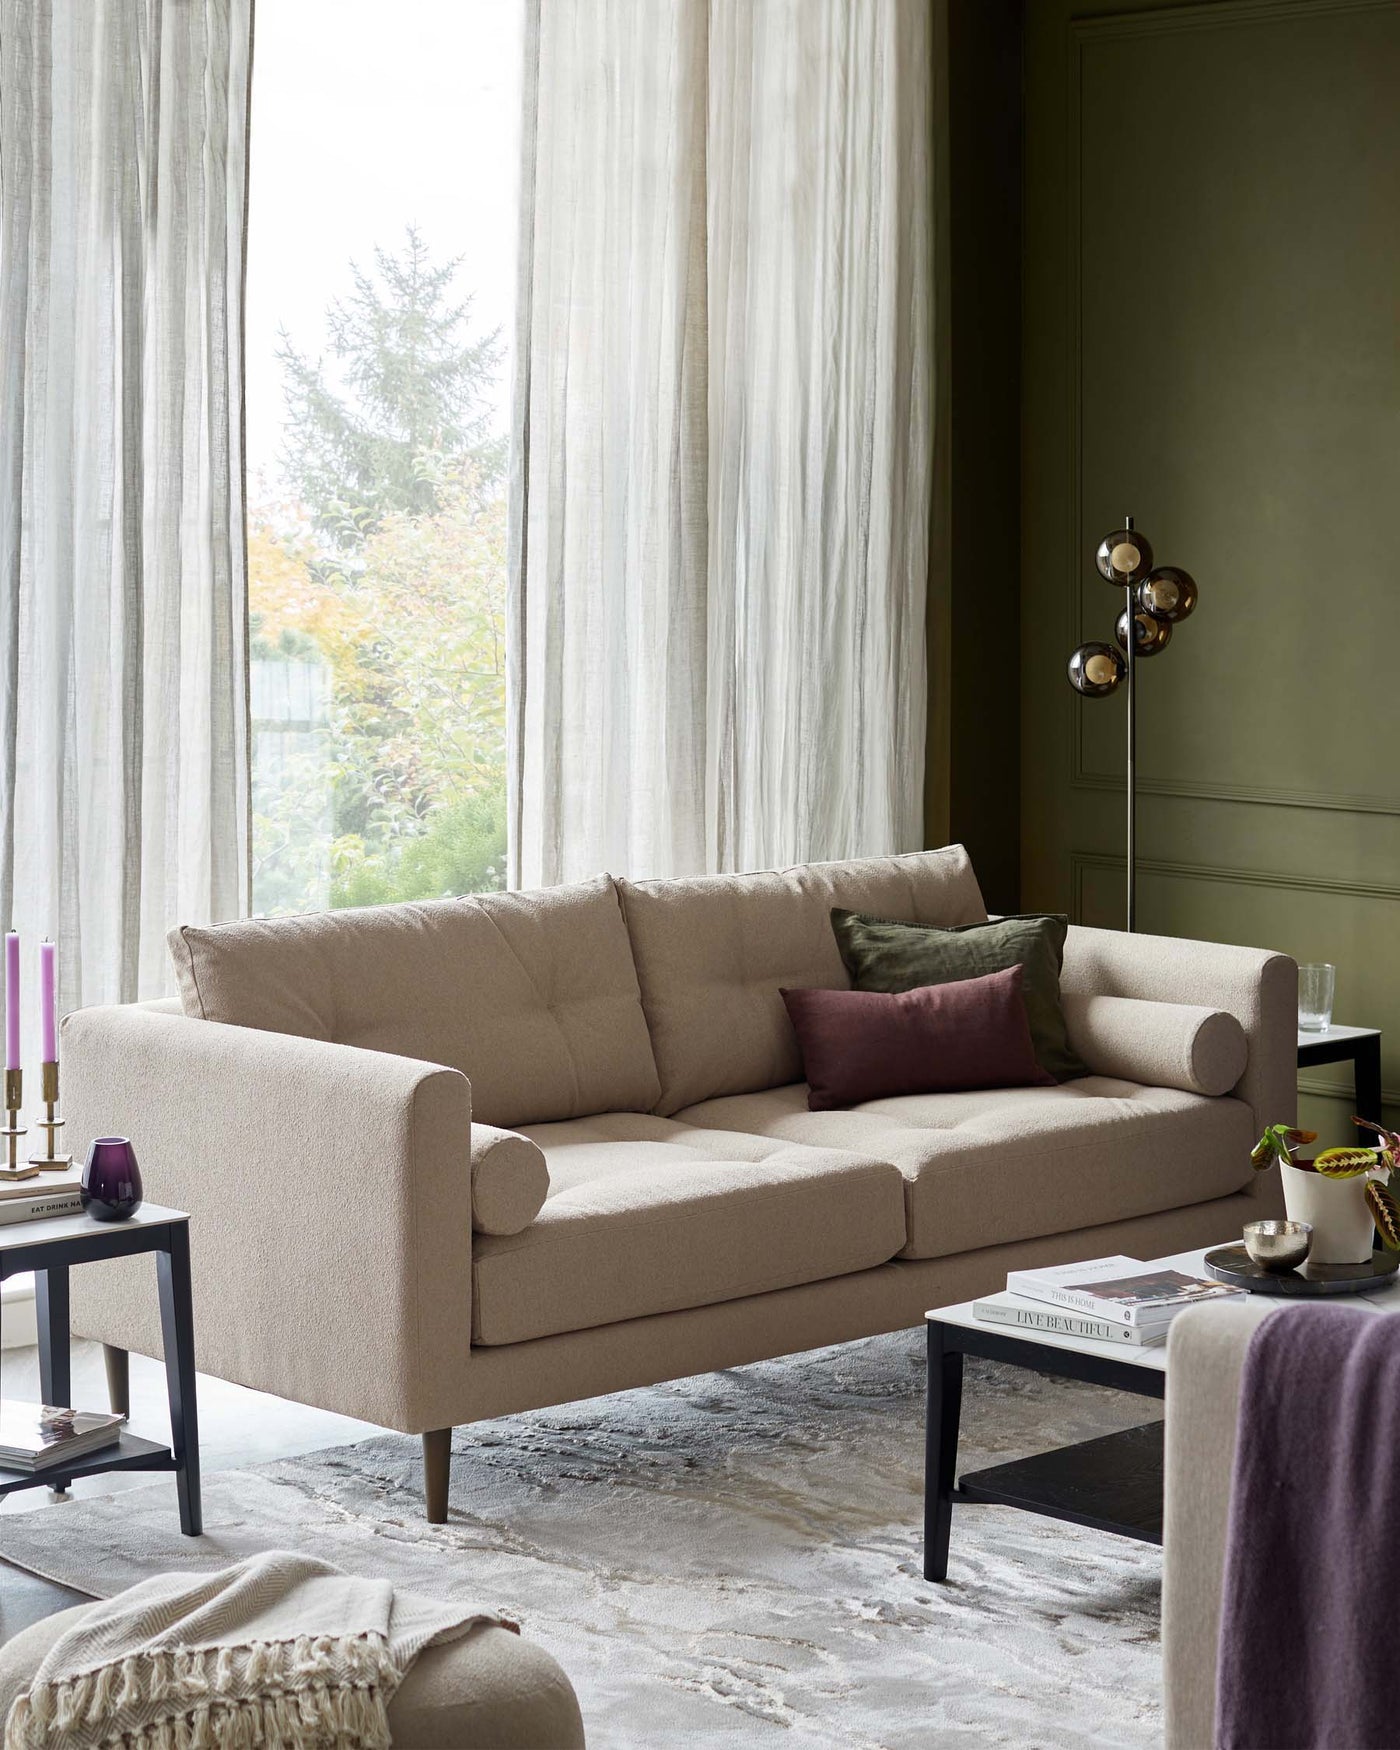 Modern beige three-seater sofa with plush cushions and simple, clean lines, accompanied by a sleek black side table with a square top and thin legs. The setting includes a grey textured area rug and minimalistic decor in a room with muted green walls and large windows draped with sheer curtains.